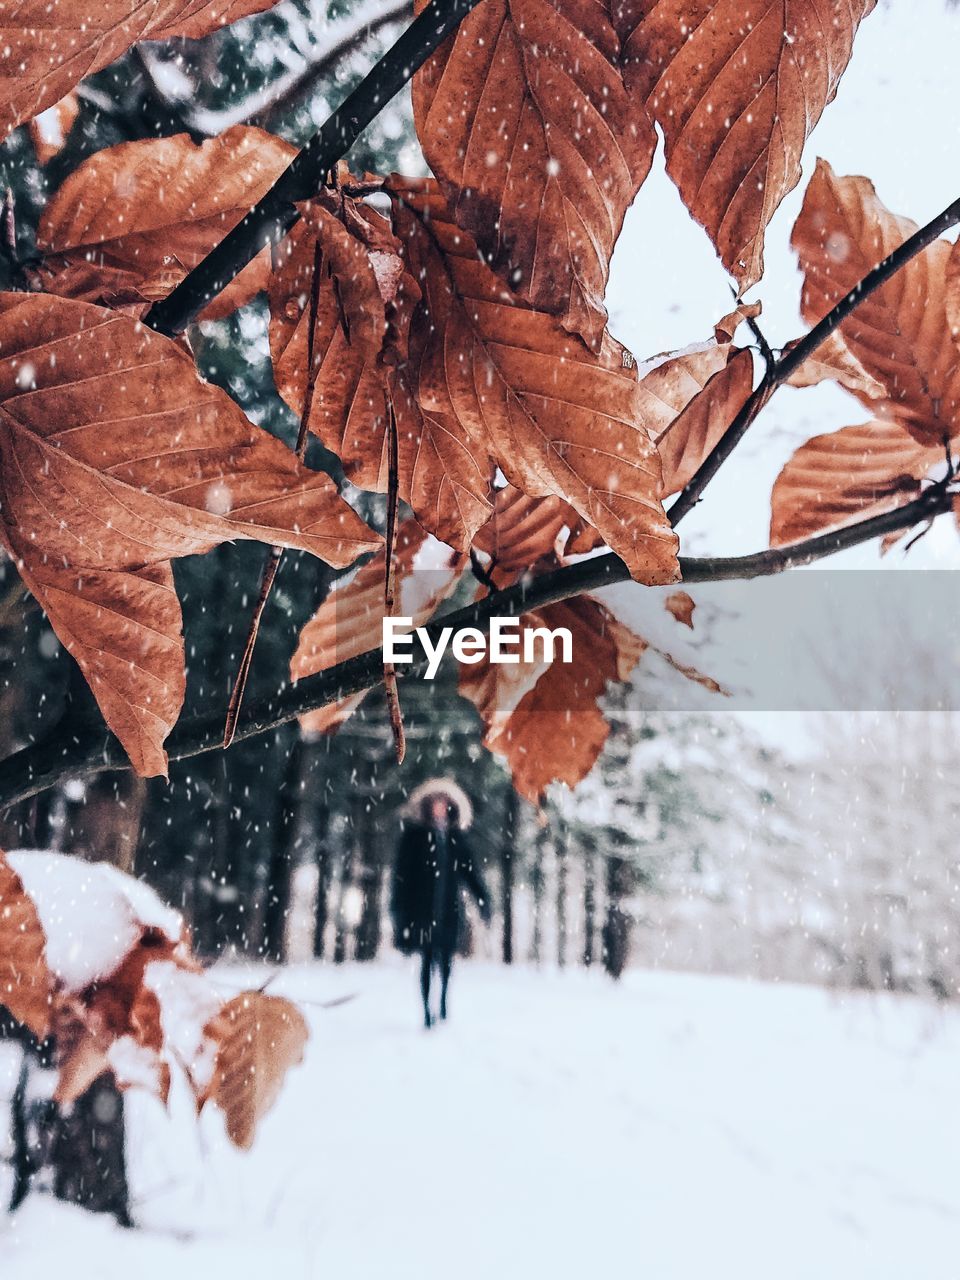 Dry leaves on tree over snow covered field with woman walking during winter